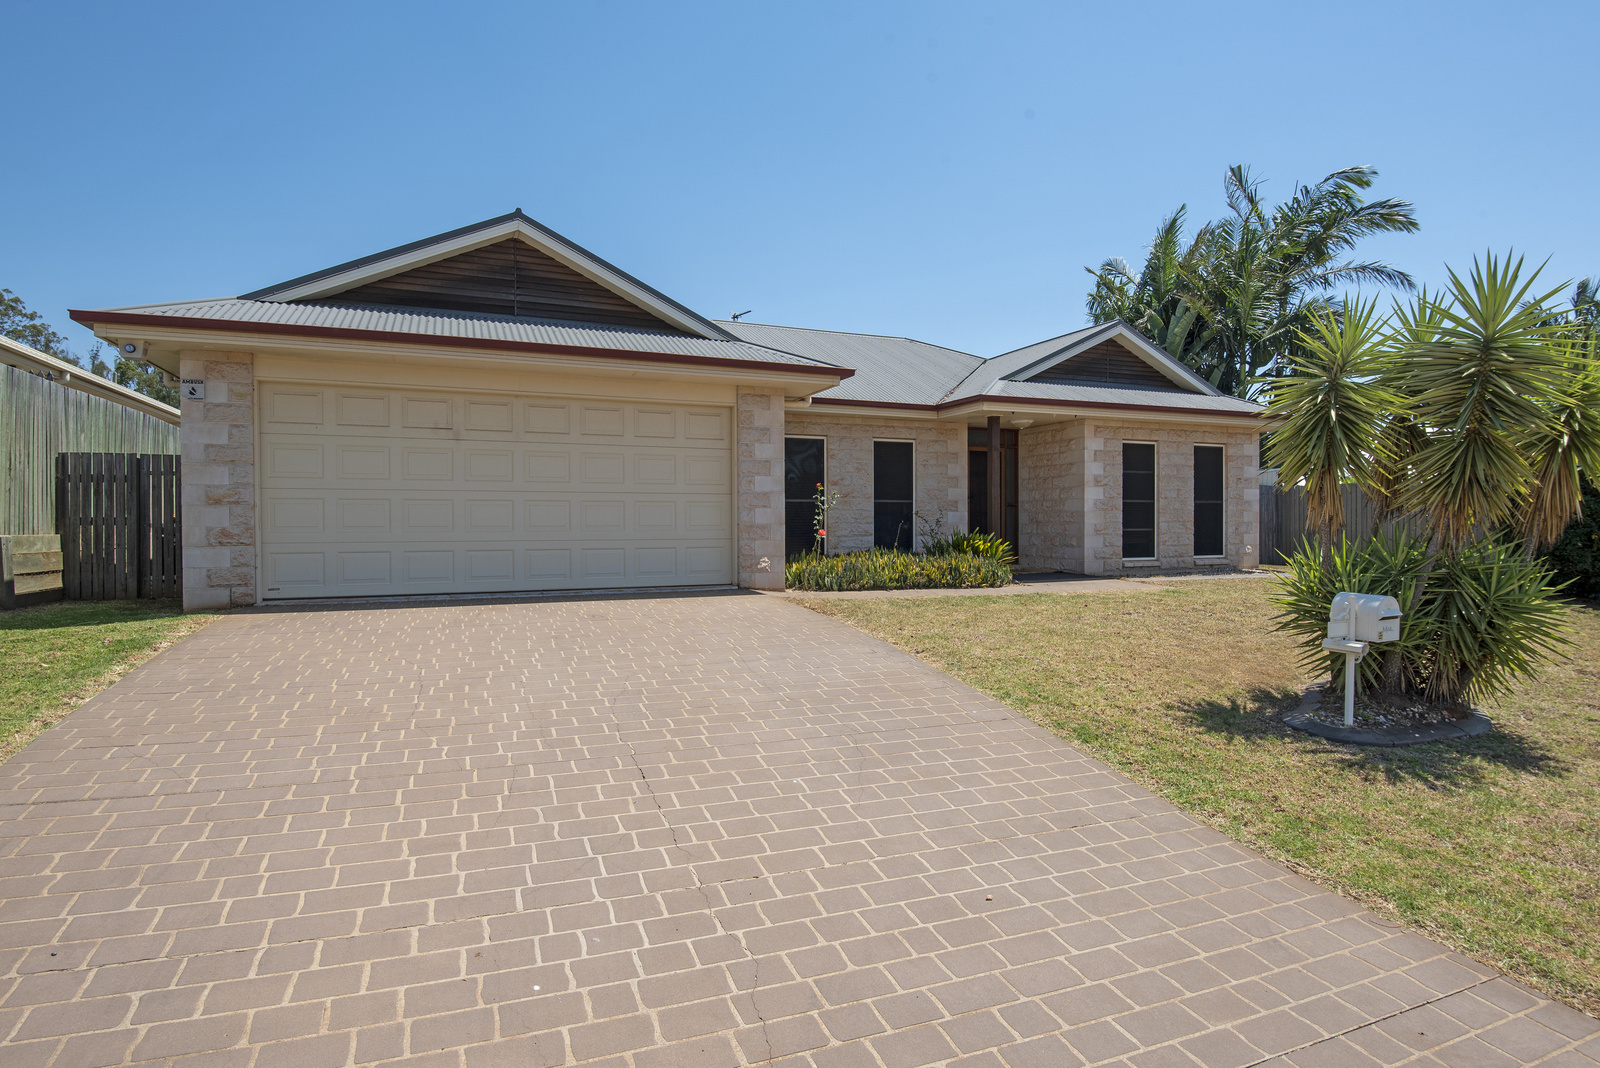 22 Currawong Street Rangeville Queensland House for Sale - RE/MAX Australia